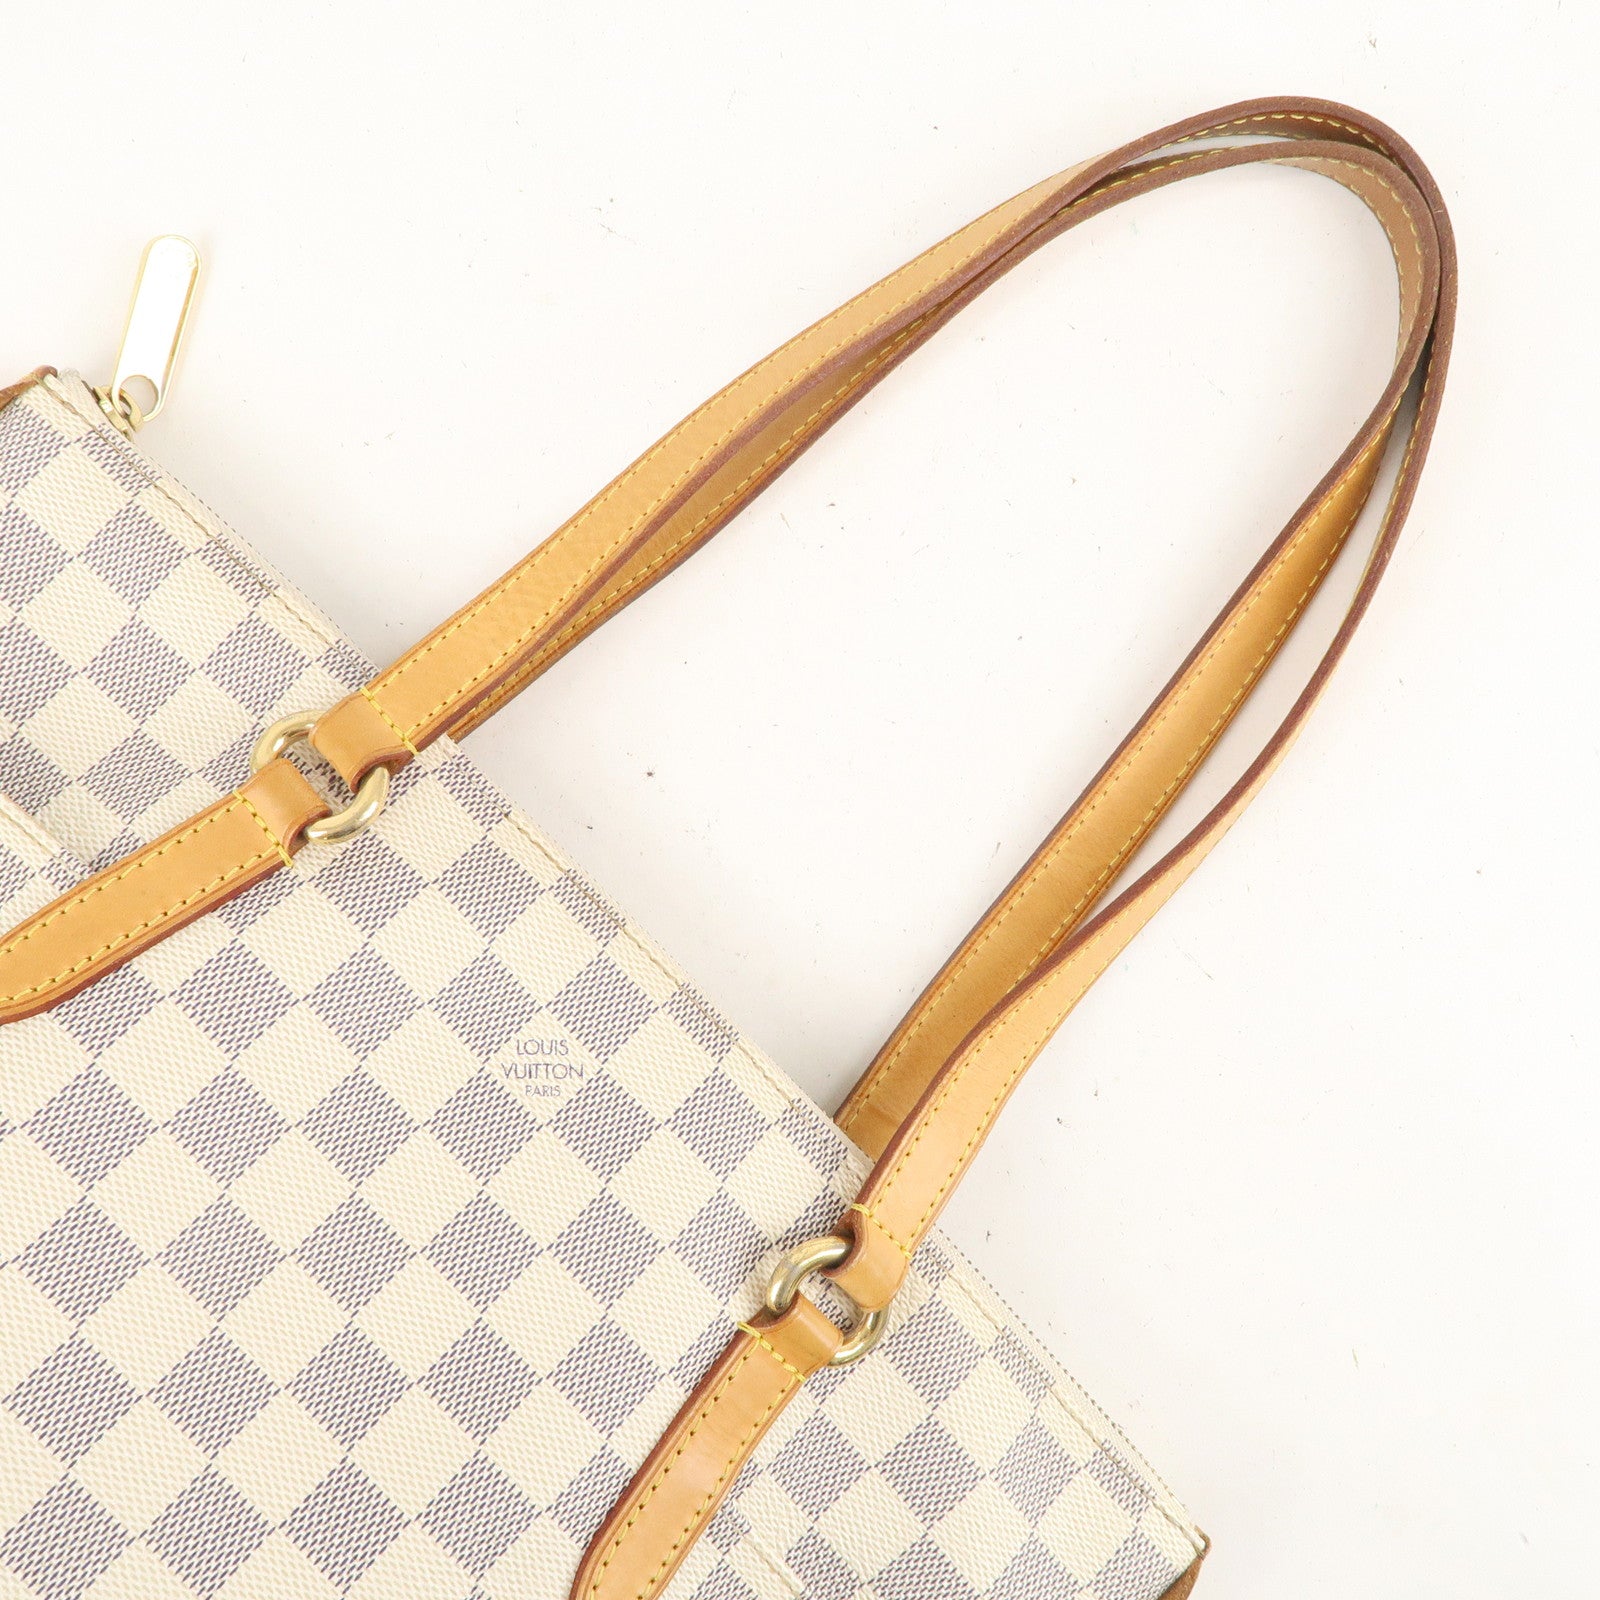 Louis-Vuitton-Damier-Azur-Totally-PM-Tote-Bag-Hand-Bag-N51261 –  dct-ep_vintage luxury Store